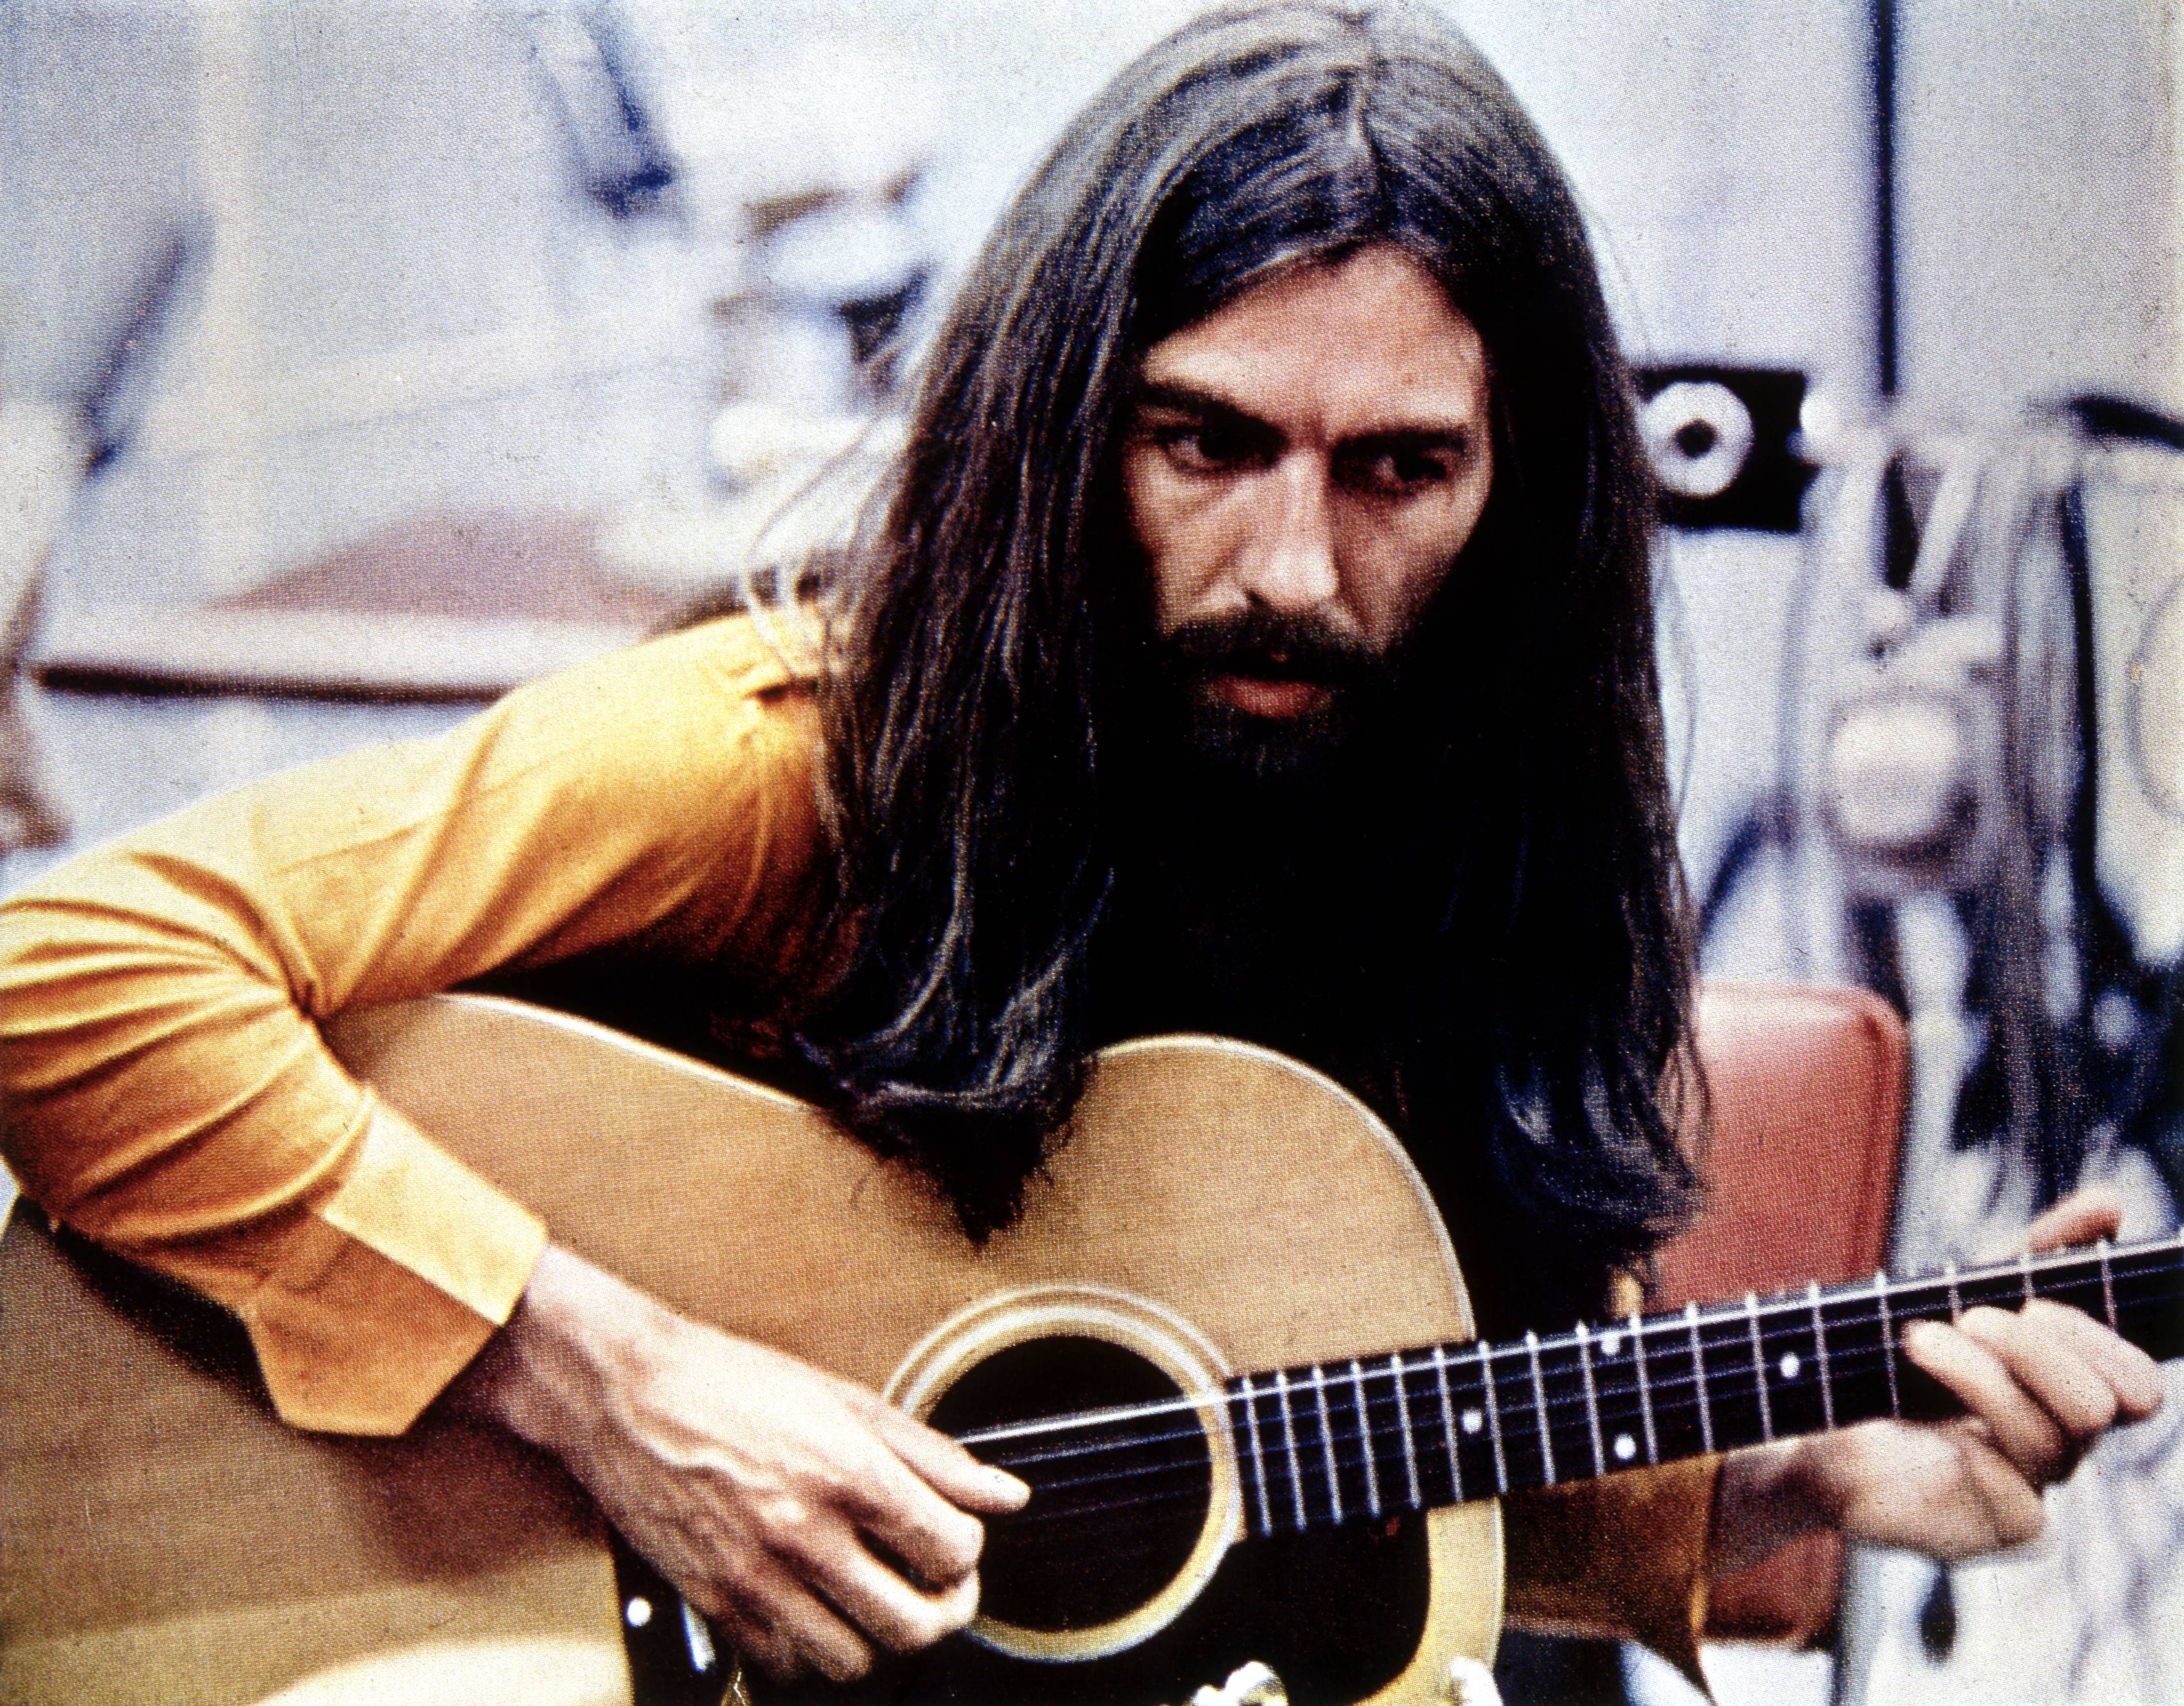 The Beatles' George Harrison playing songs on a guitar